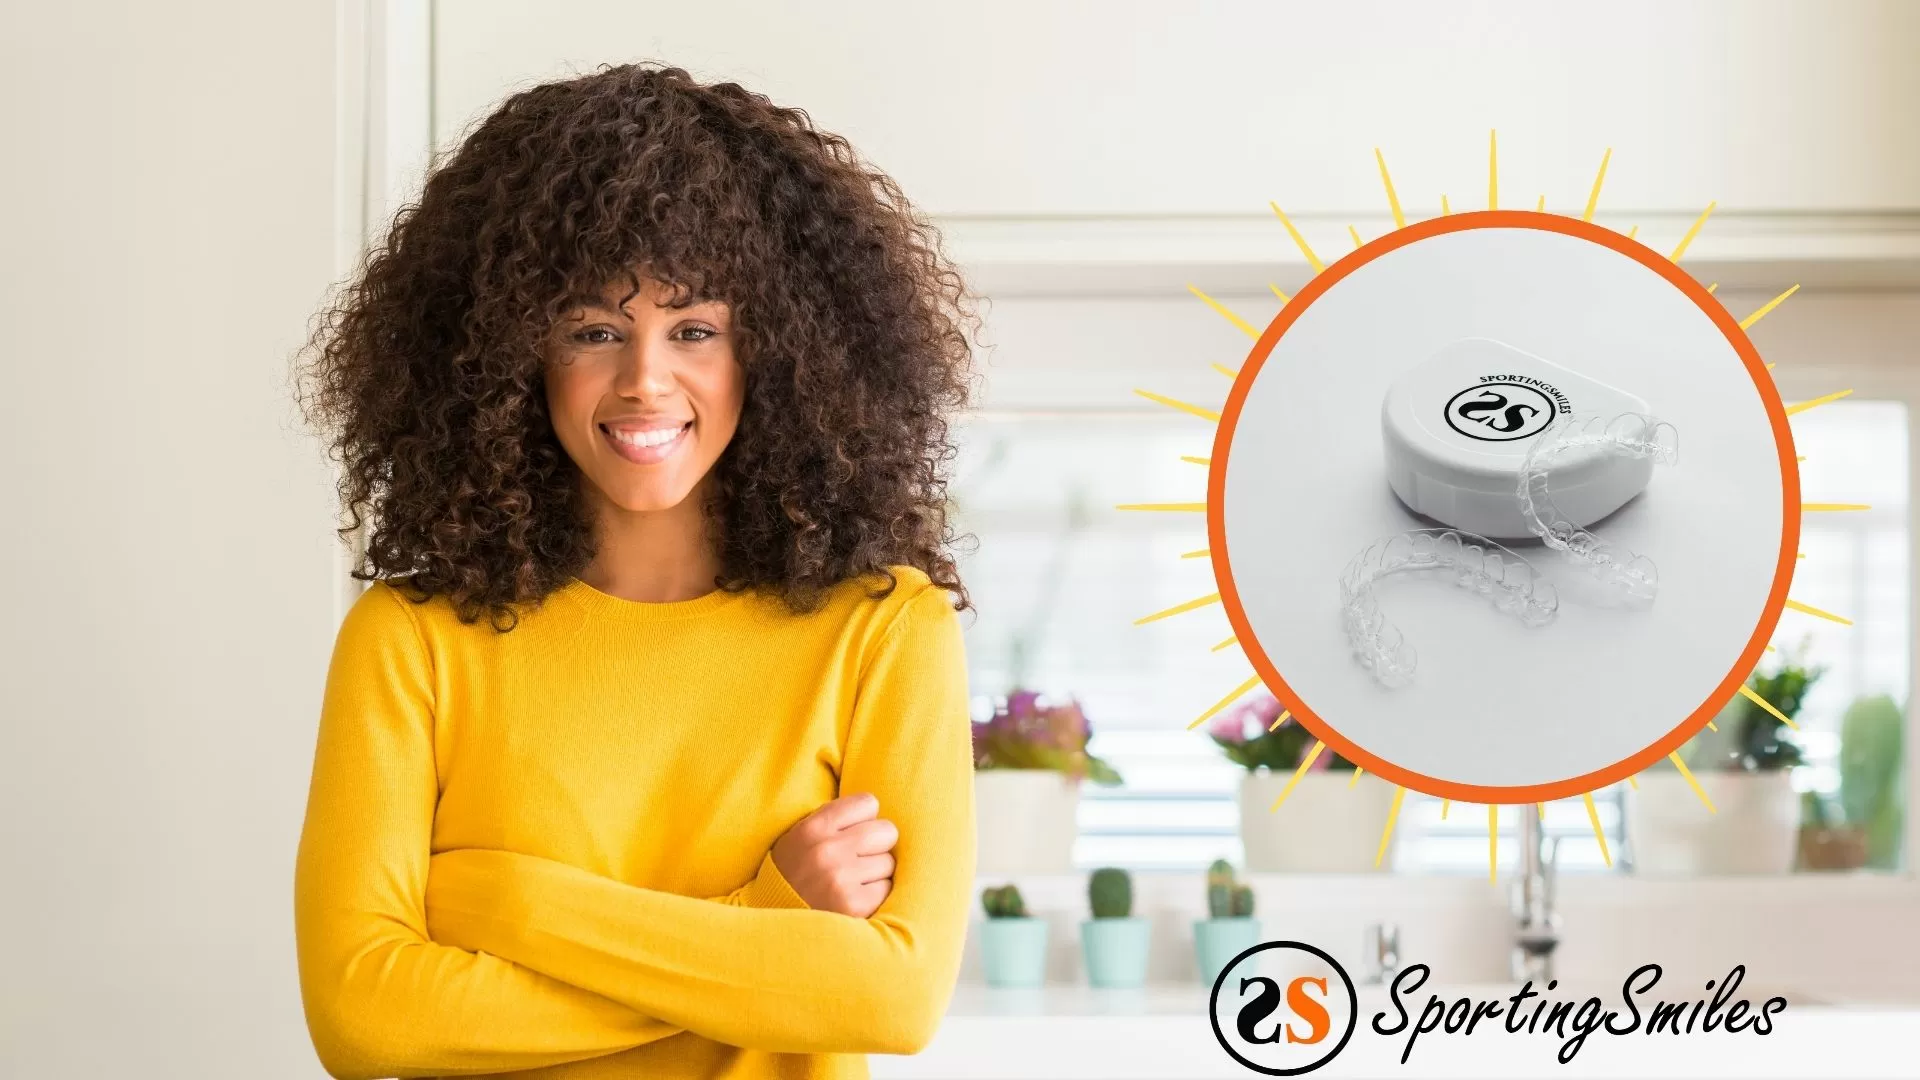 Girl Smiling in Kitchen with Affordable Online Replacement Retainers